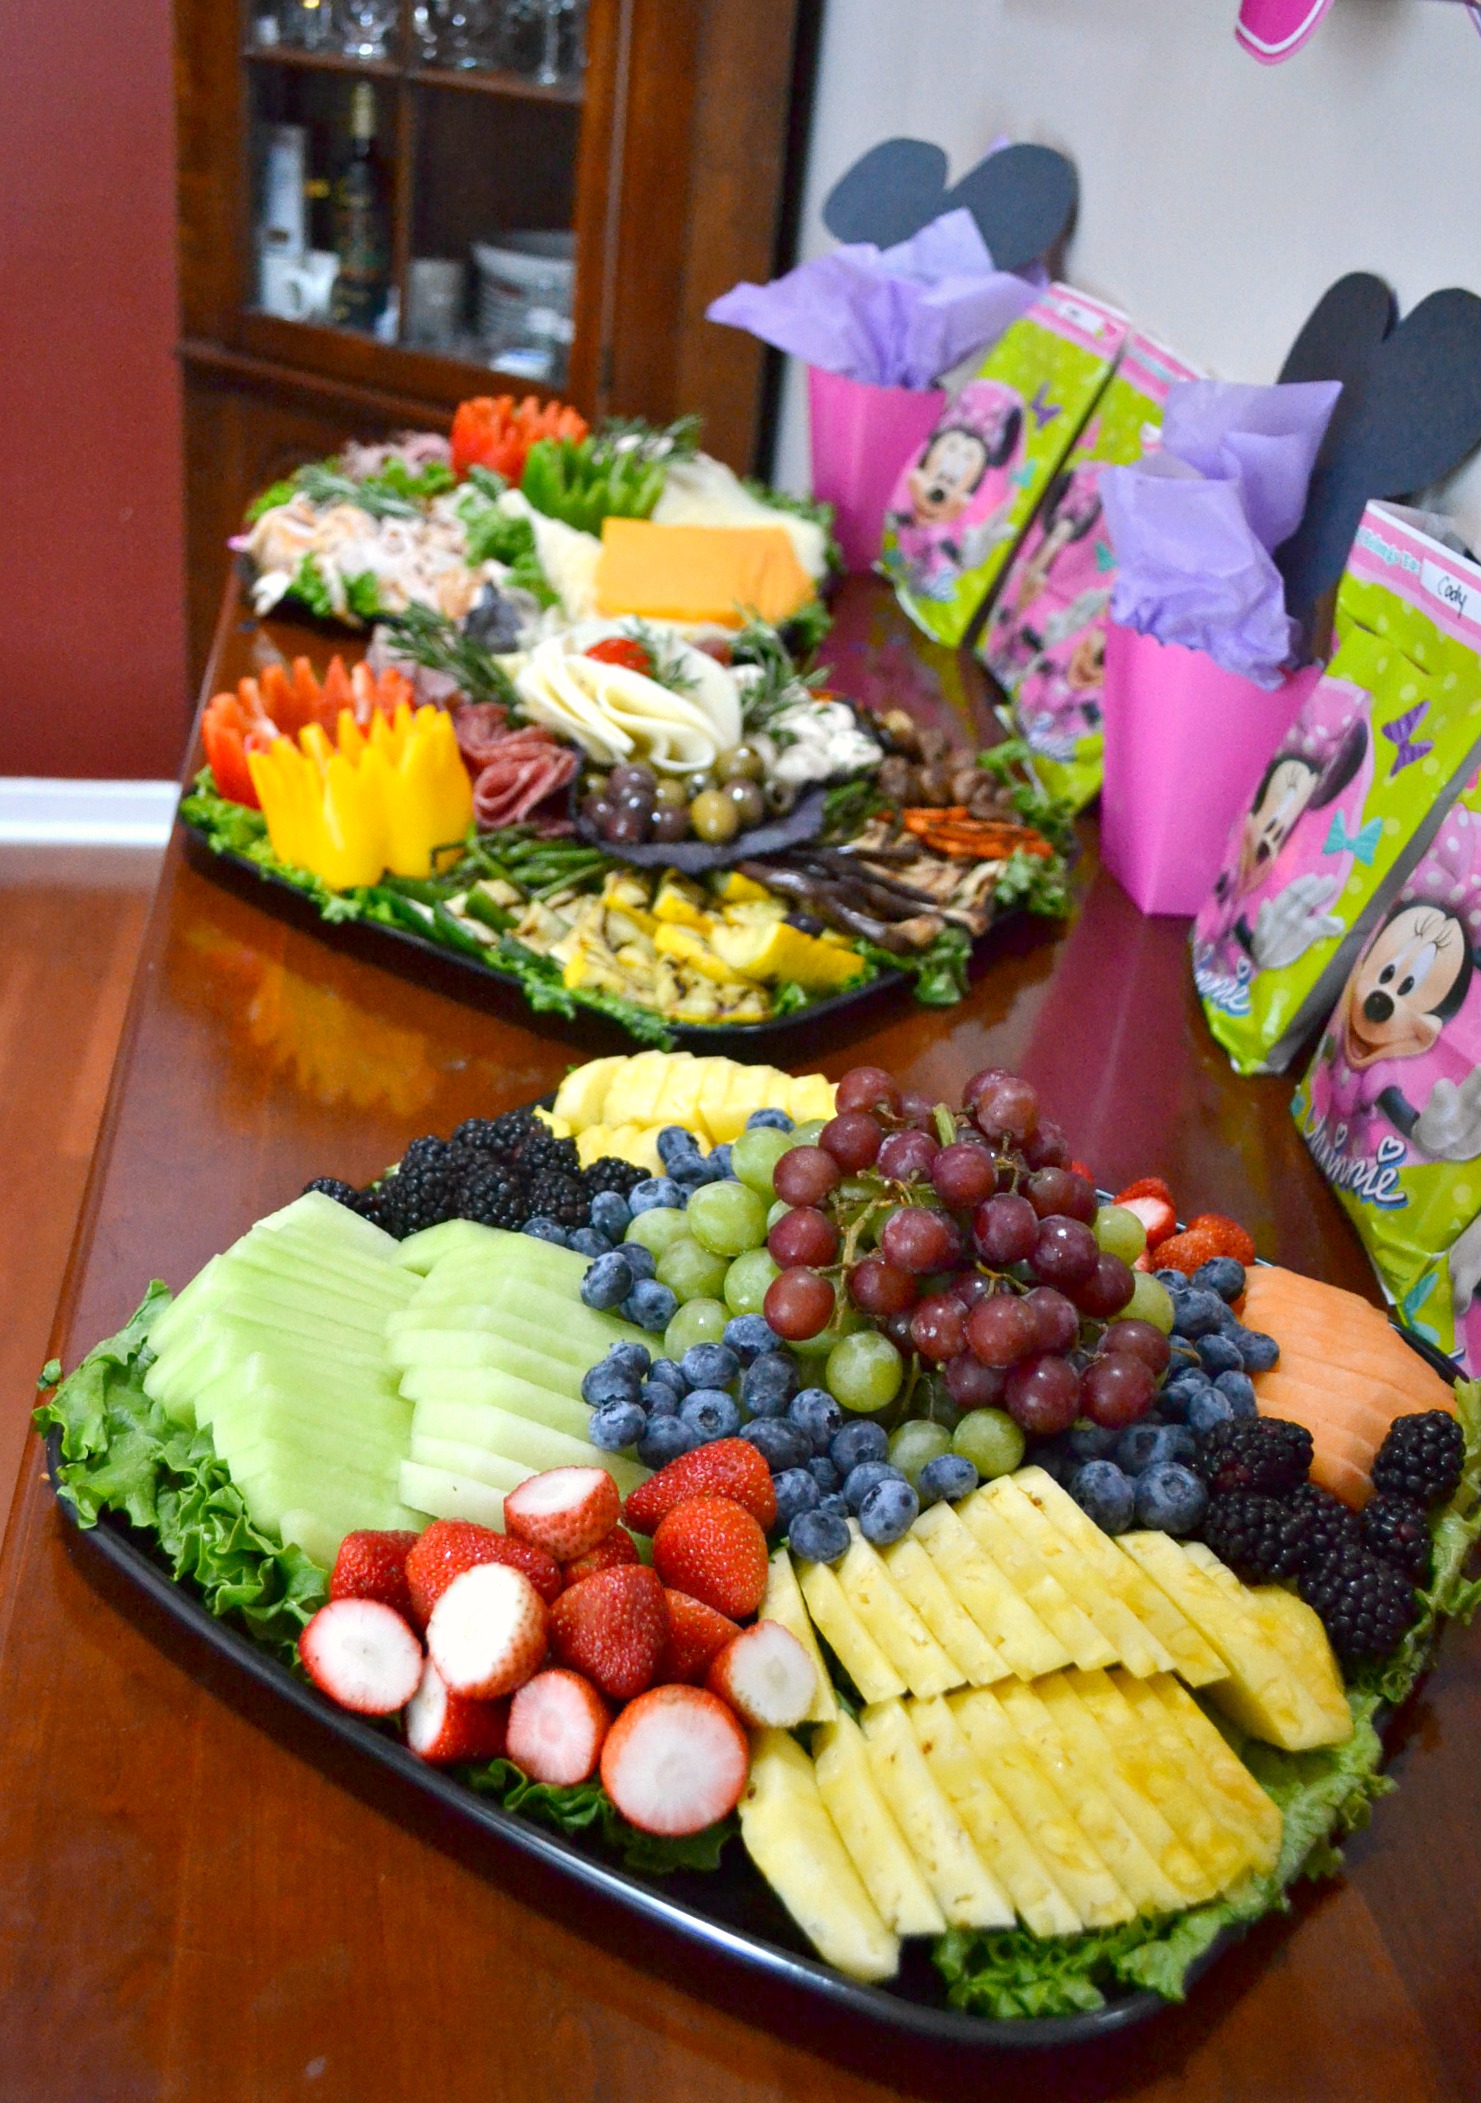 Easy Toddler Party Planning with Whole Foods Catering - Opera Singer in